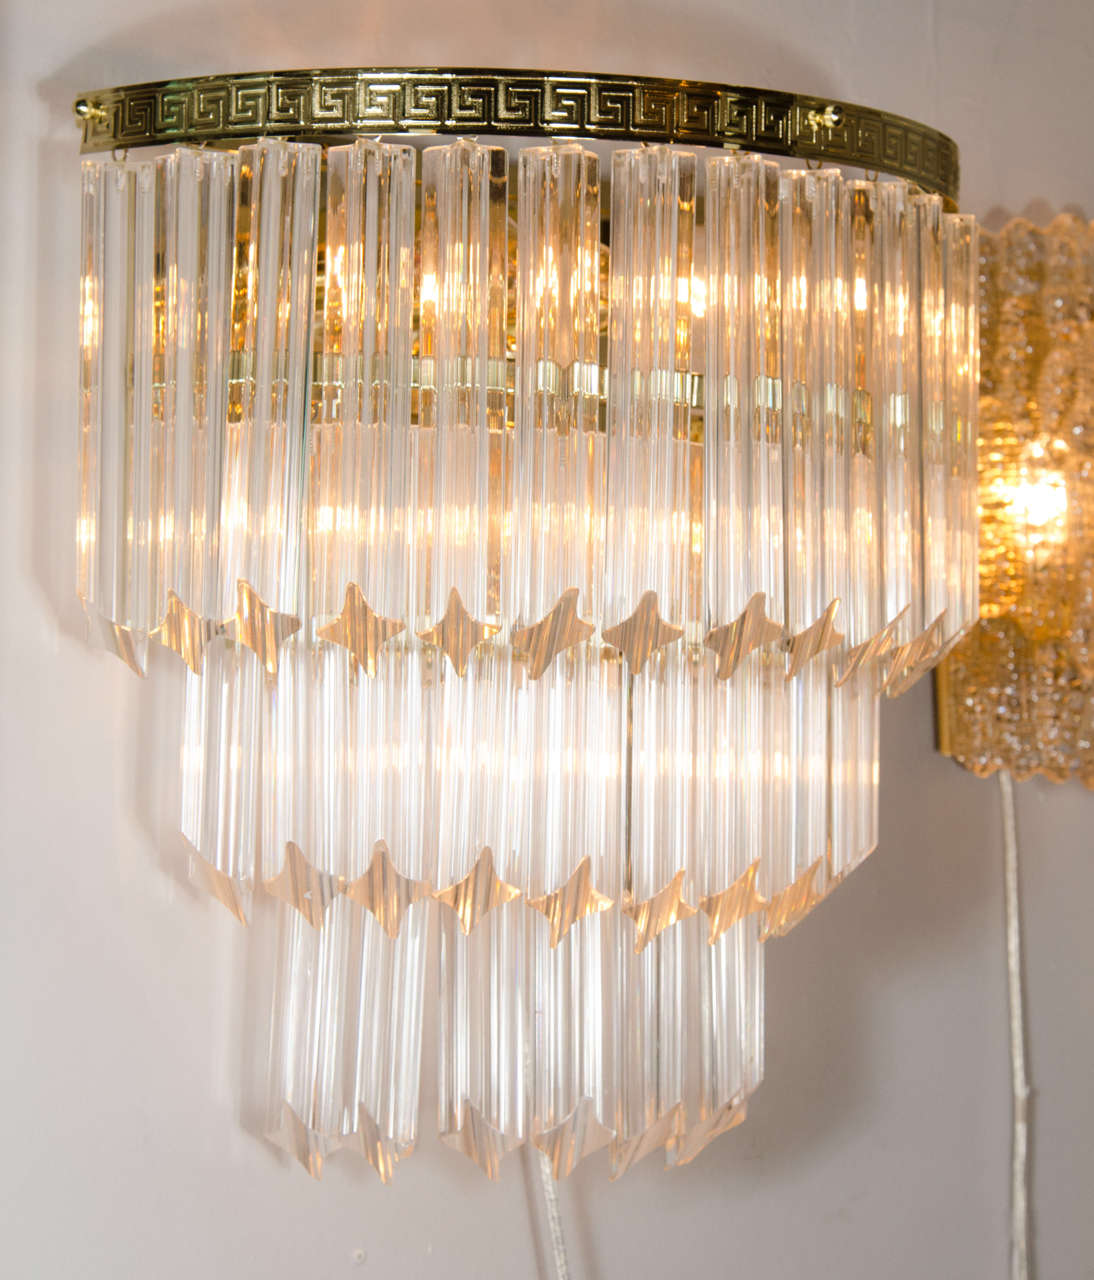 Pair of Mid-Century modernist three-tiered Triedre Camer cut-crystal sconces. This pair of sconces is comprised of three tiers of individually hung Camer Triedre cut-crystal rods, descending from top to bottom, in a staggered formation. The Triedre